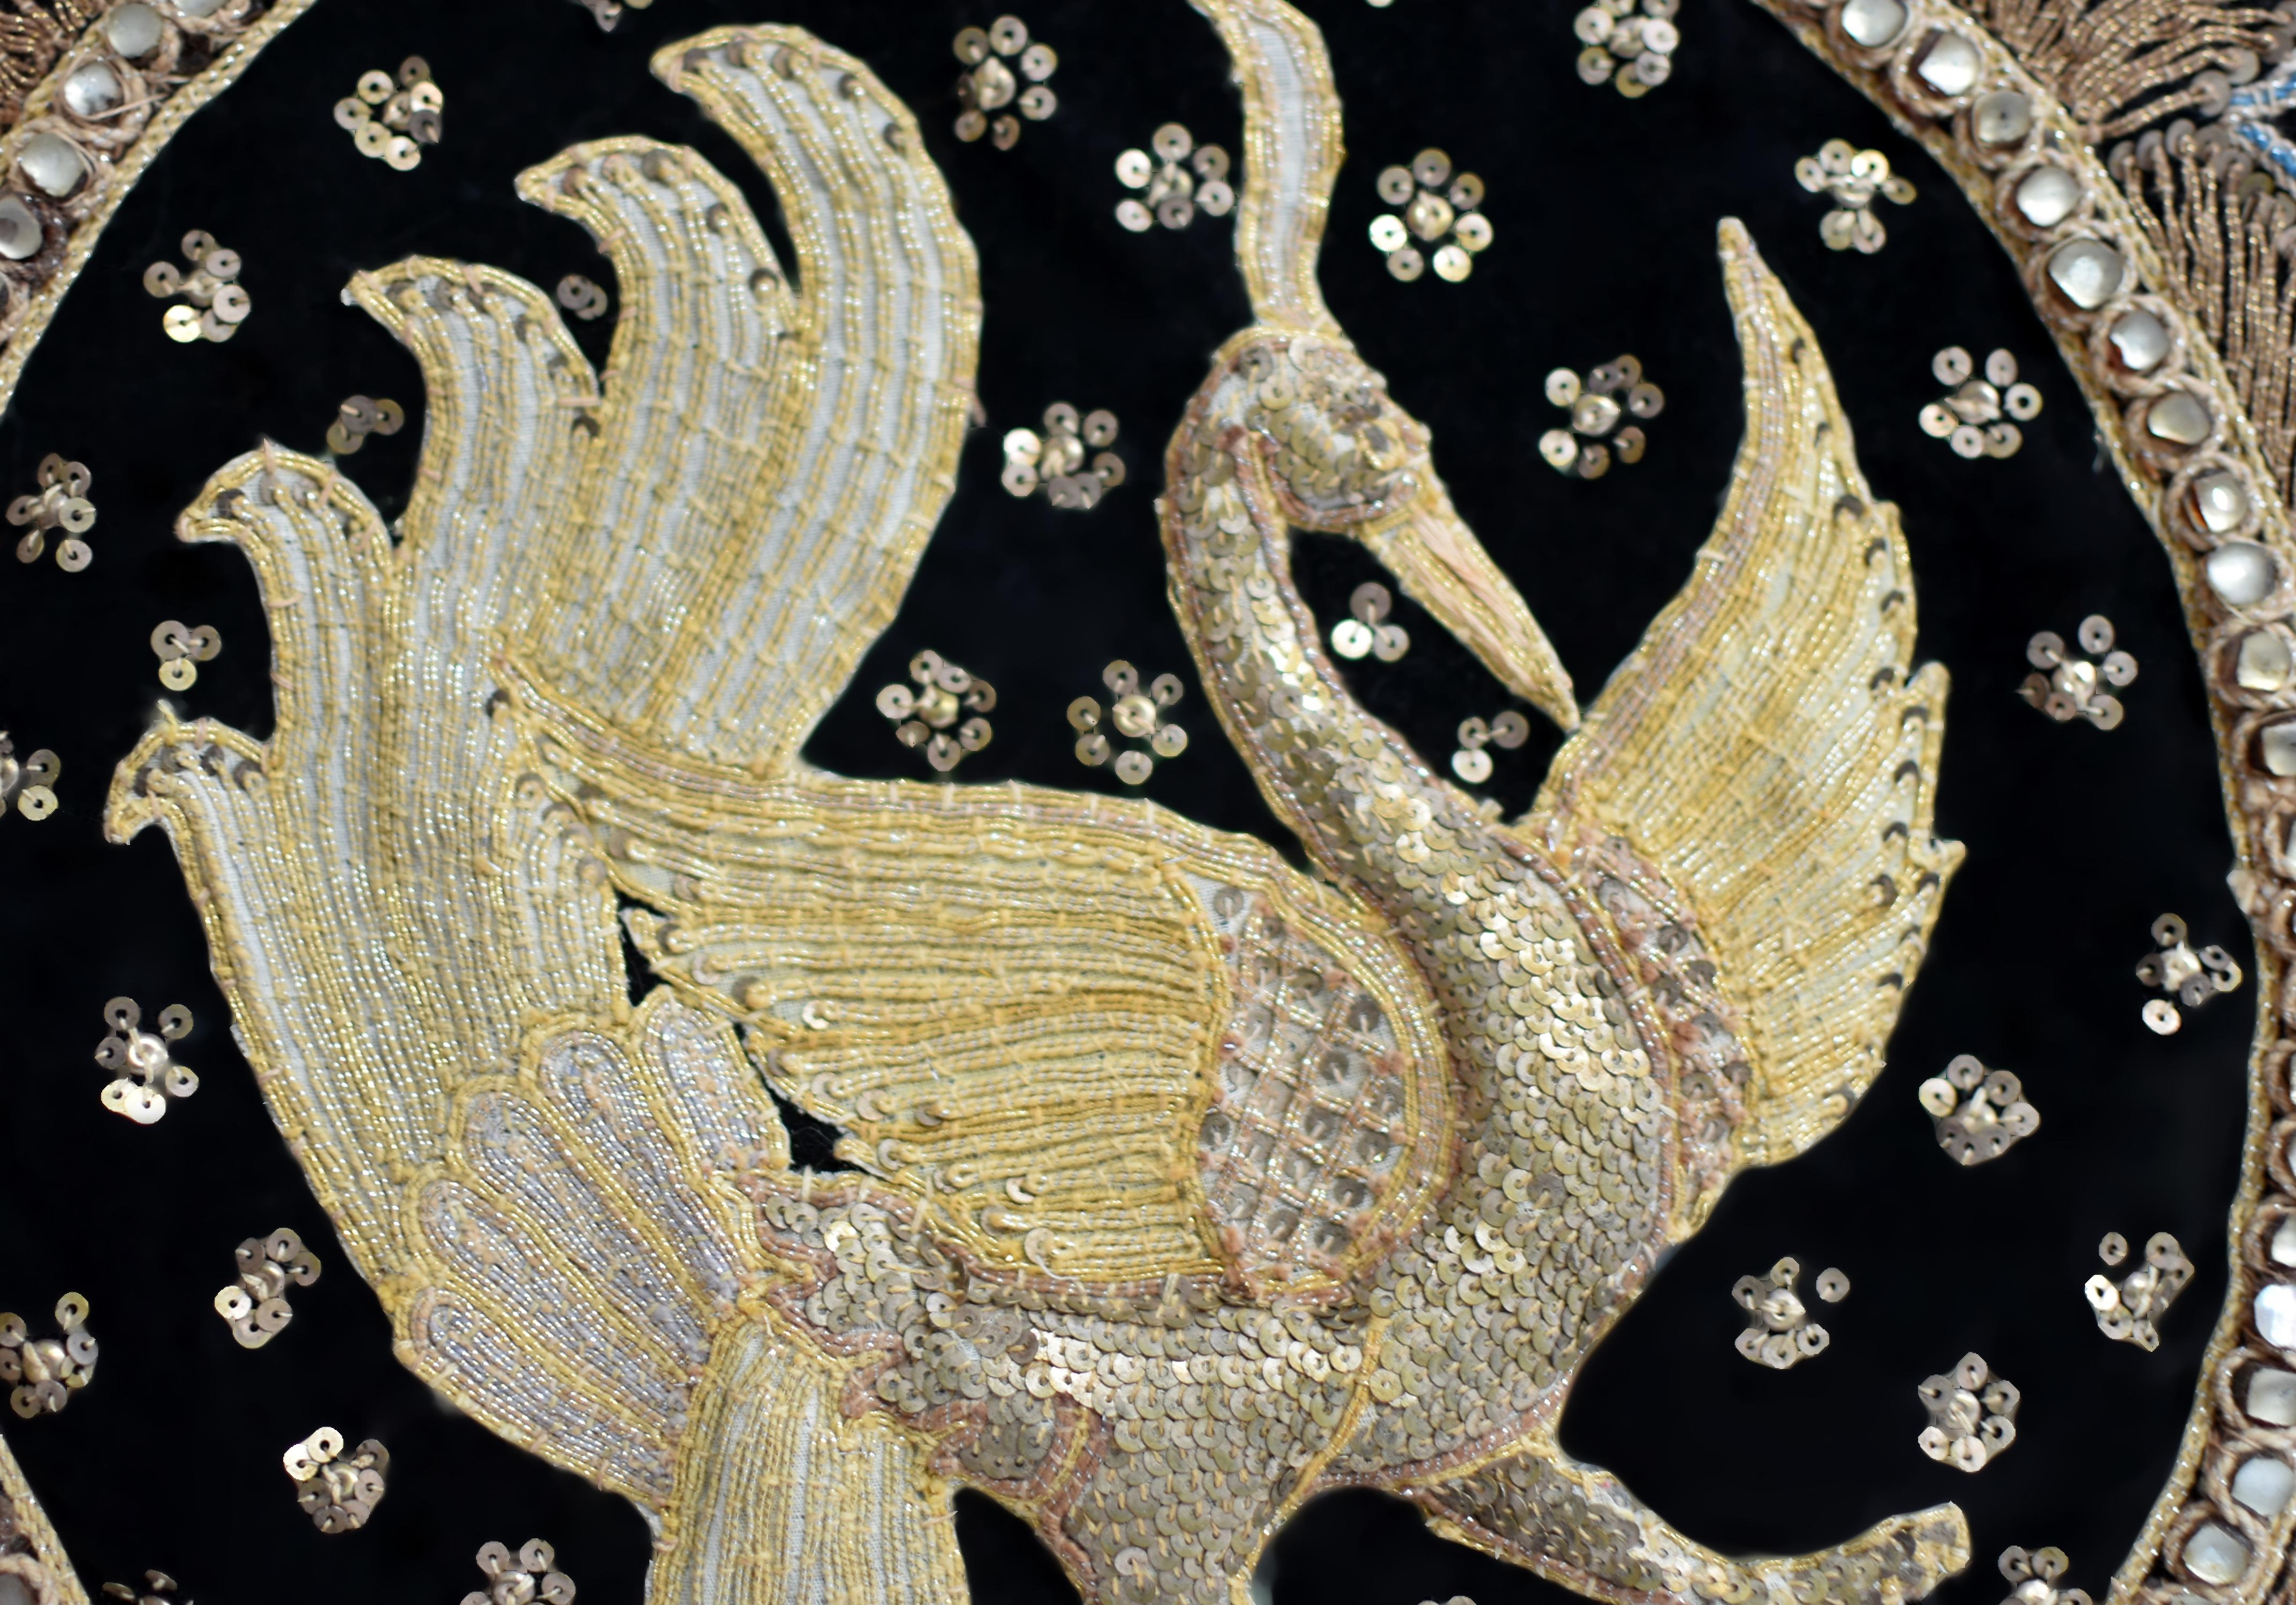 A stunning Thai royal style hand embroidery symbolizing good fortune. The large art piece features a pair of stuffed peacocks embroidered and covered with gold sequins on black velvet background. The medallions are trimmed with gold threads and